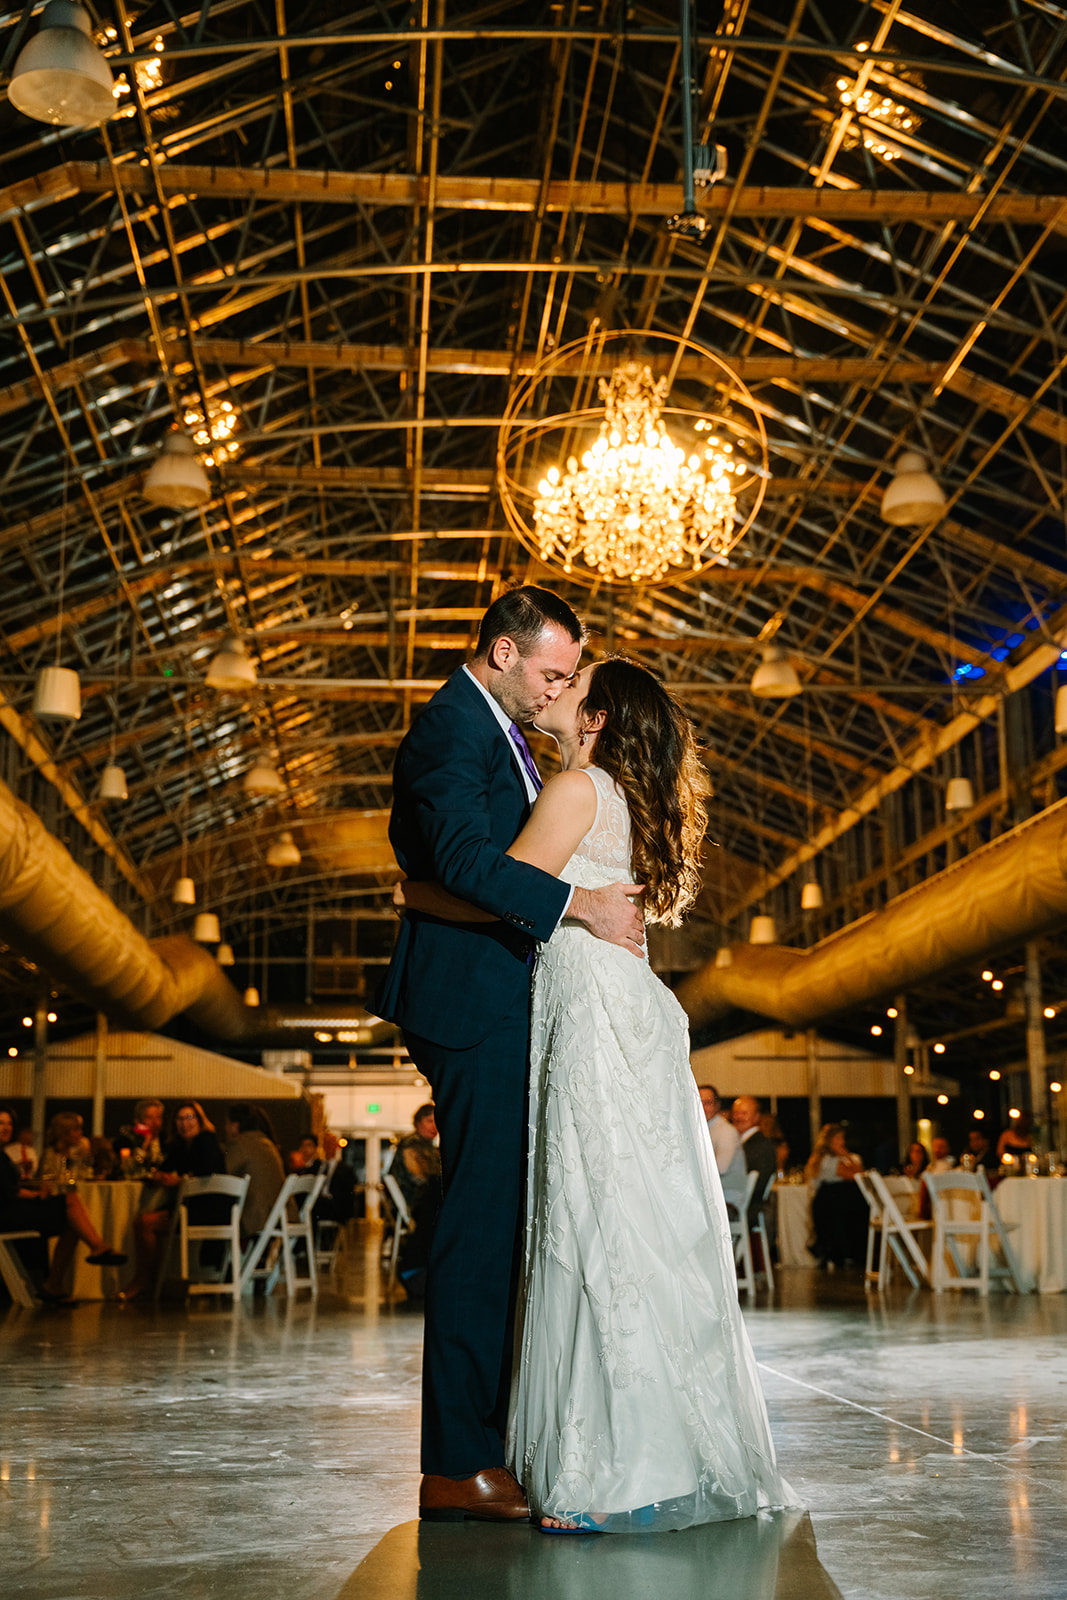 A stunning first dance on this couples wedding day at Greenhouse No.7